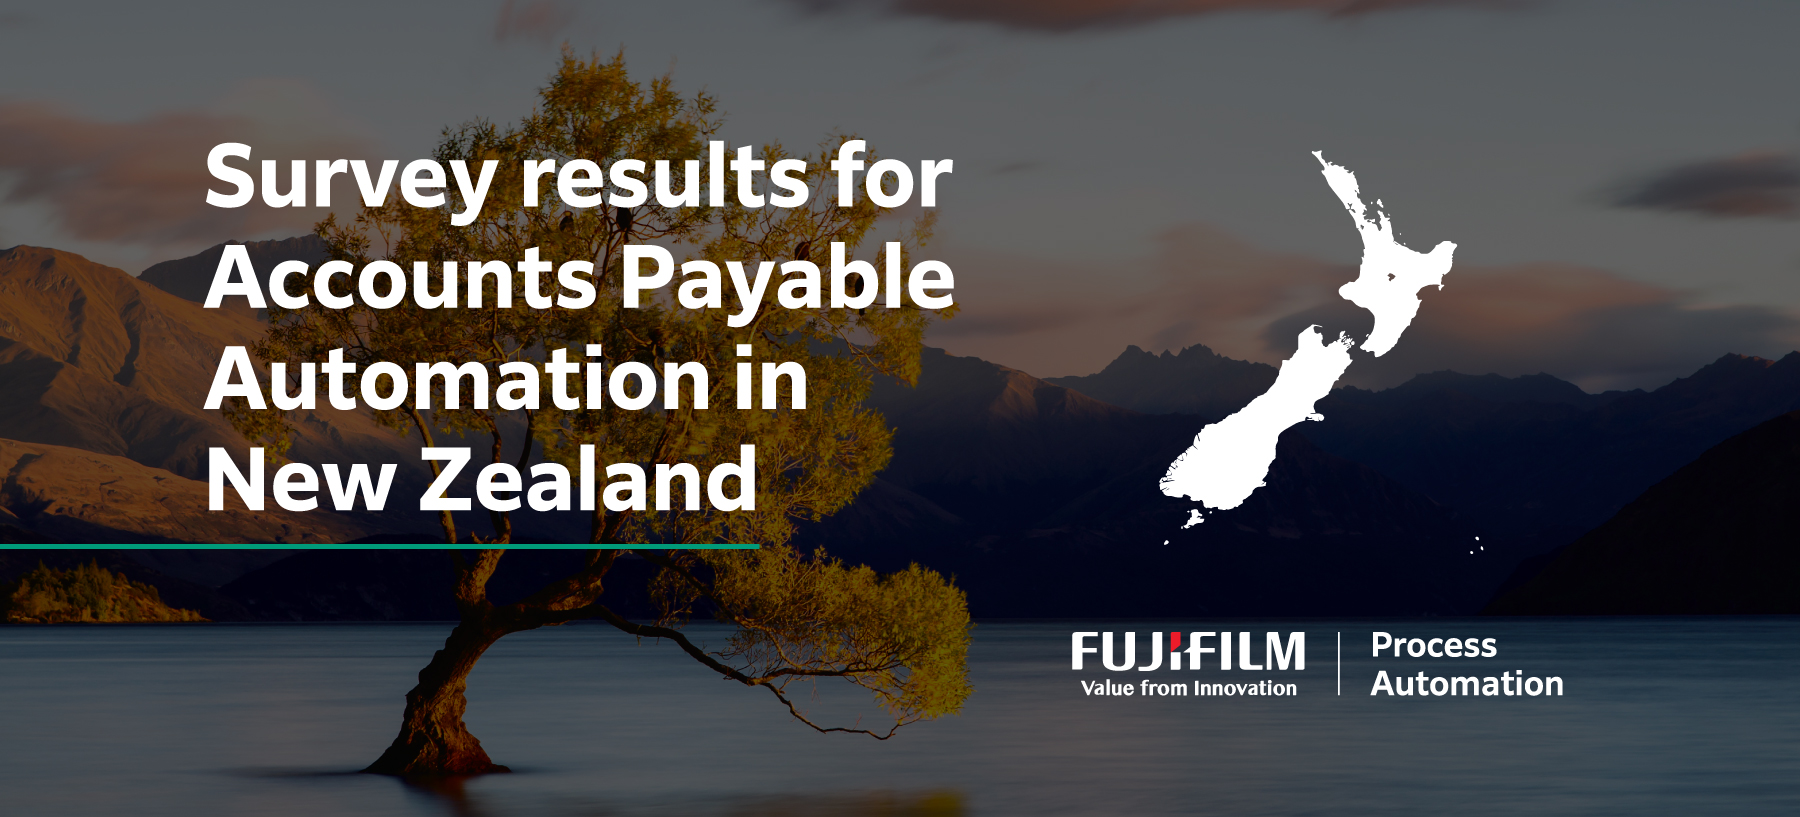 Accounts Payable Automation in New Zealand Survey. See our results clearly showing a need for AP automation in NZ workplaces.